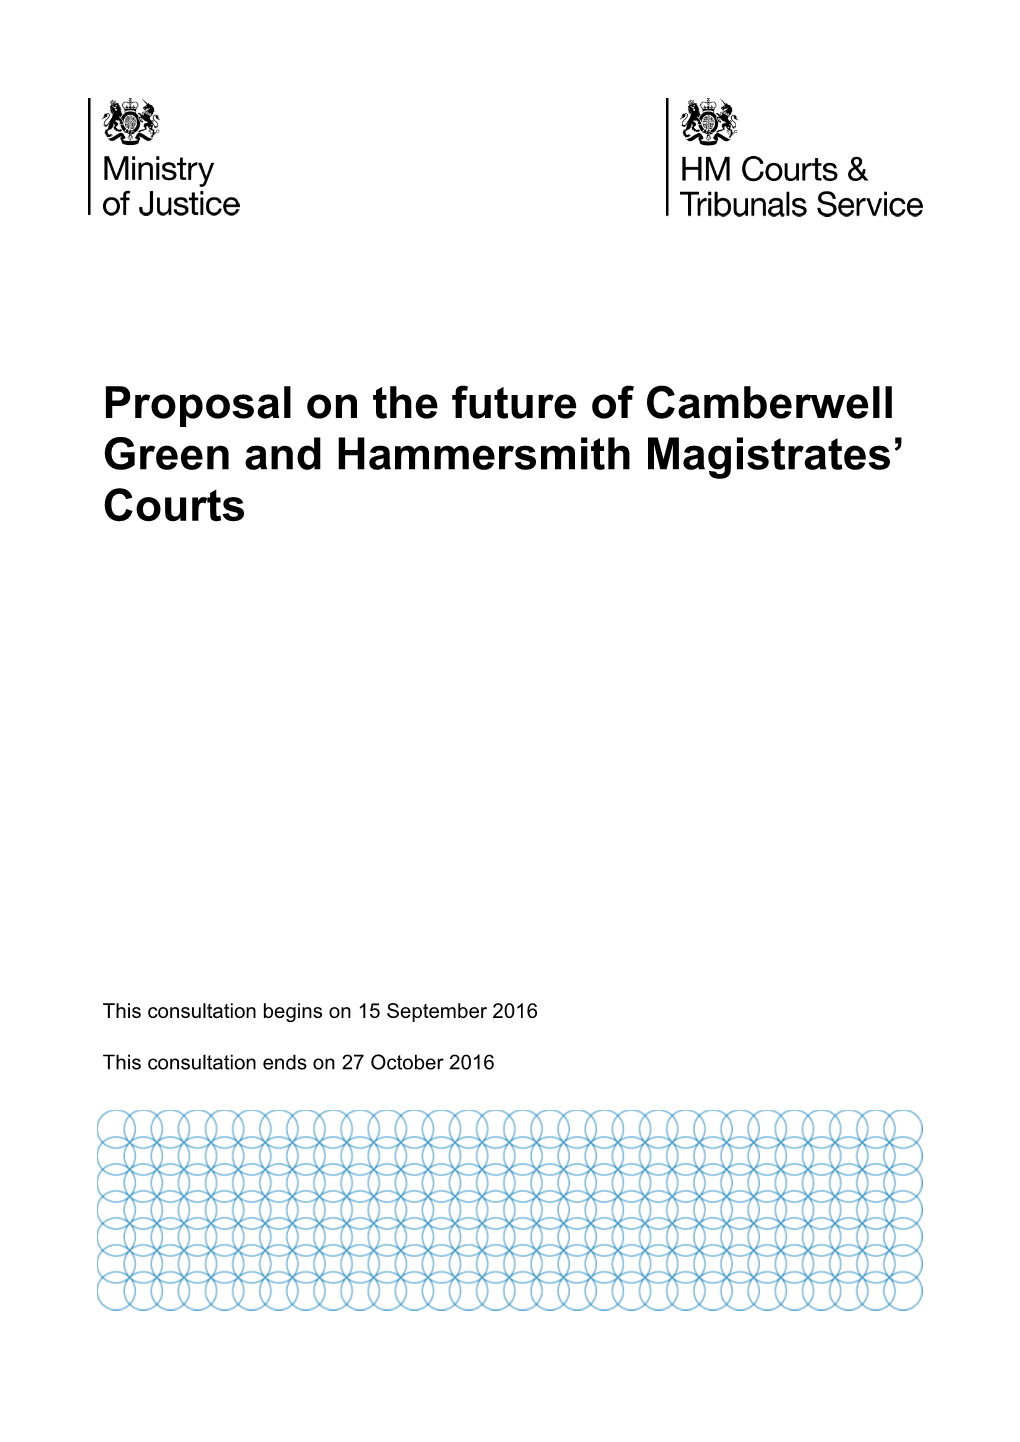 Proposal on the Future of Camberwell Green and Hammersmith Magistrates’ Courts